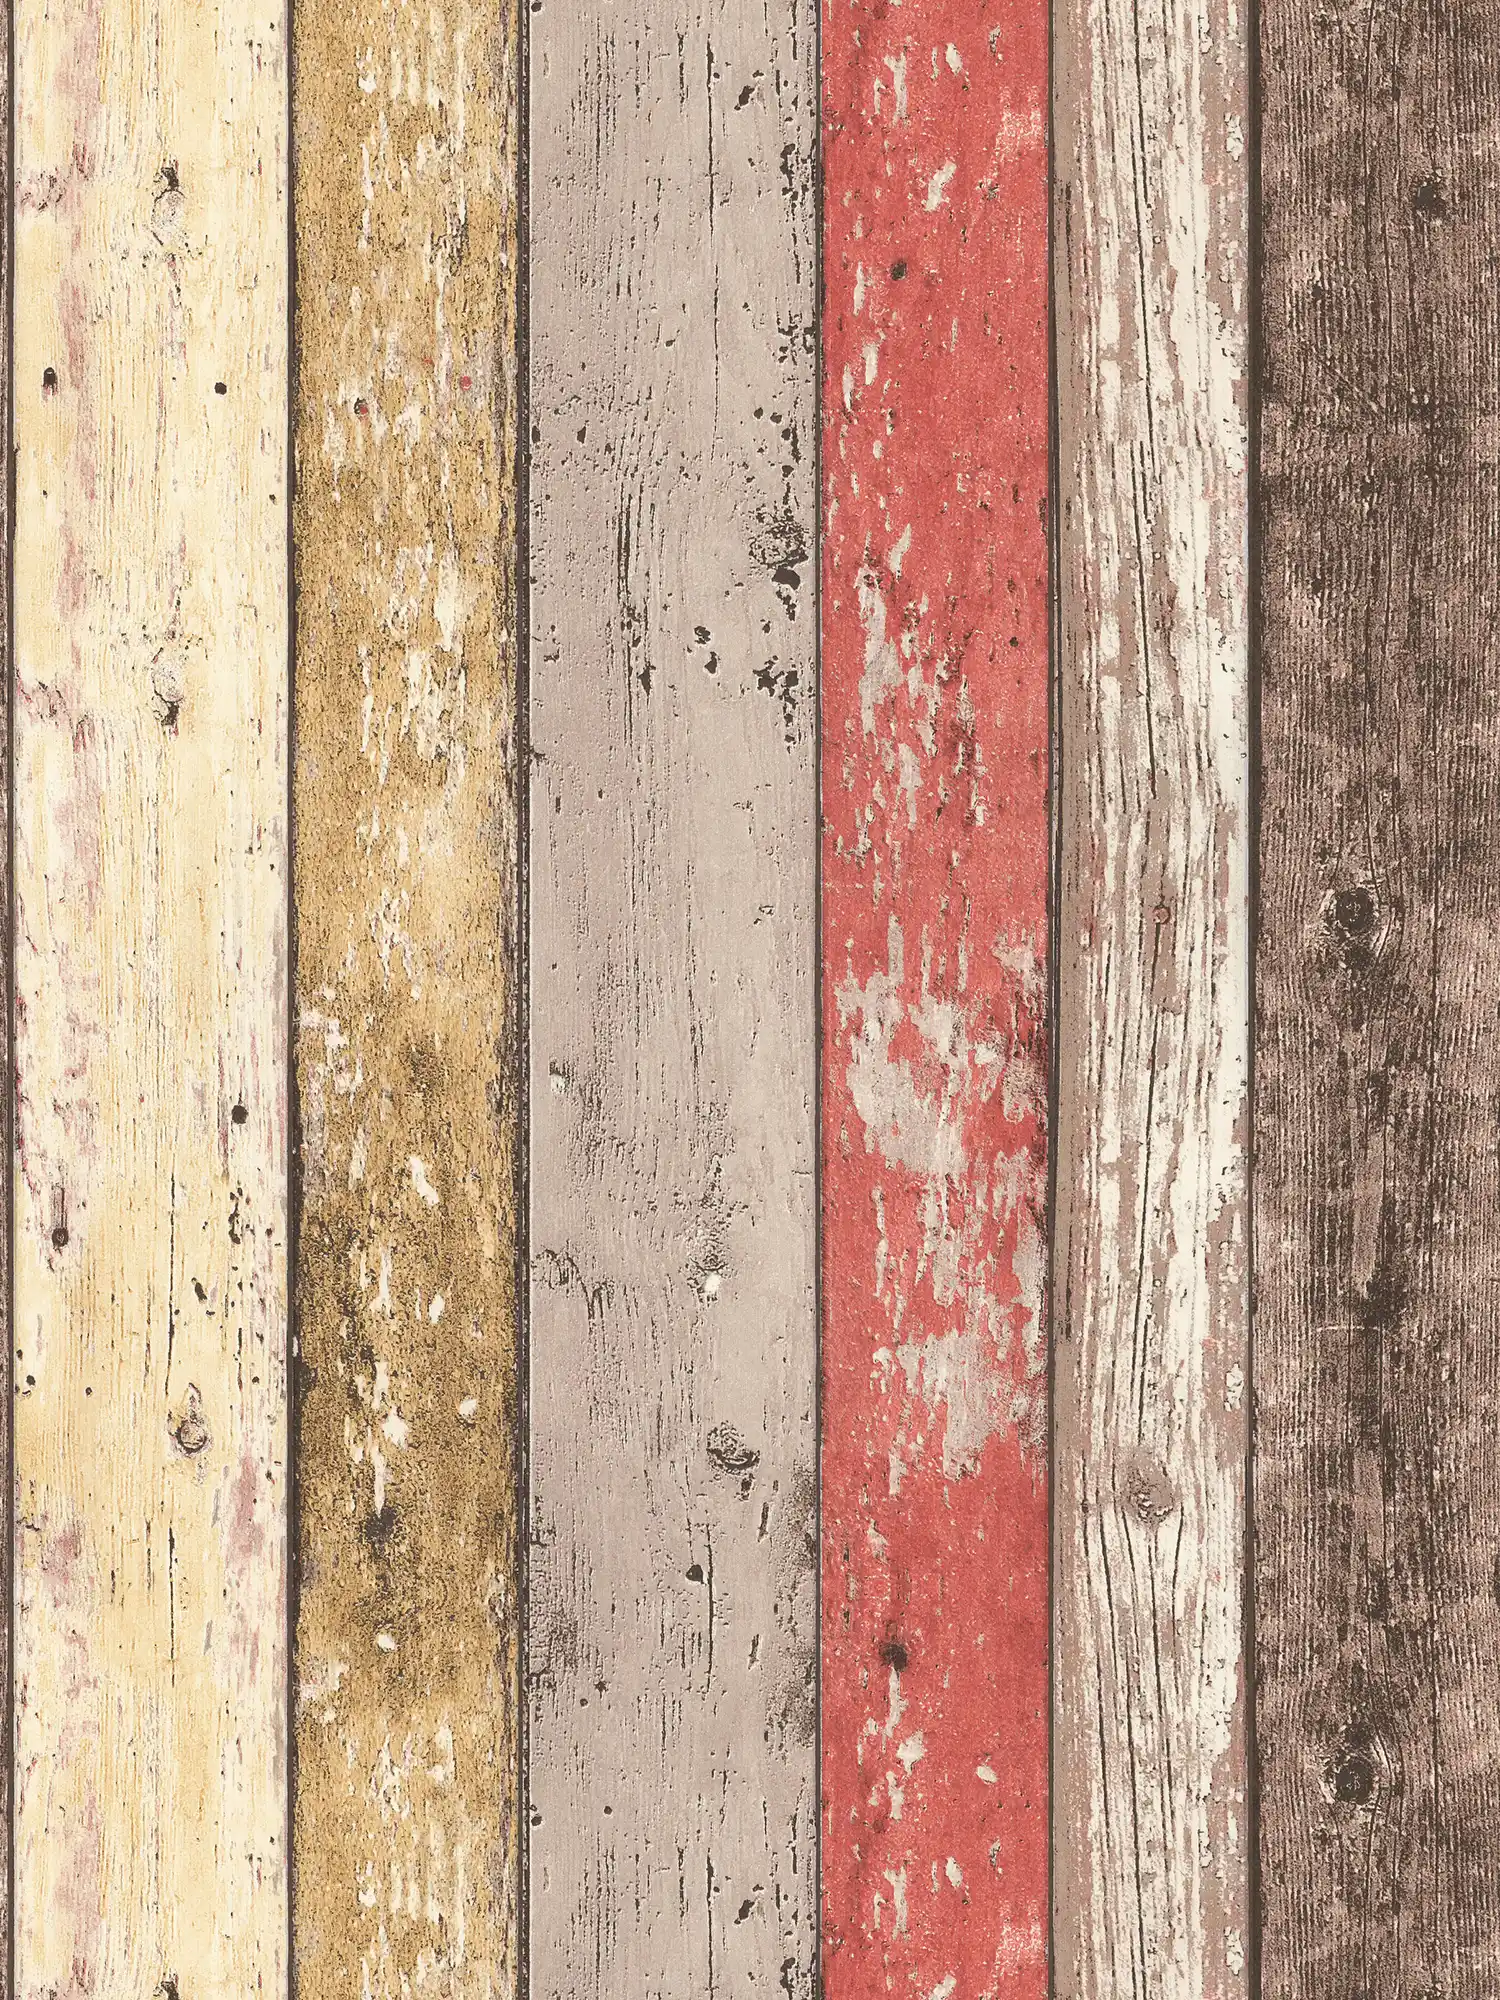         Wooden wallpaper with used look for vintage & country style - brown, red, beige
    